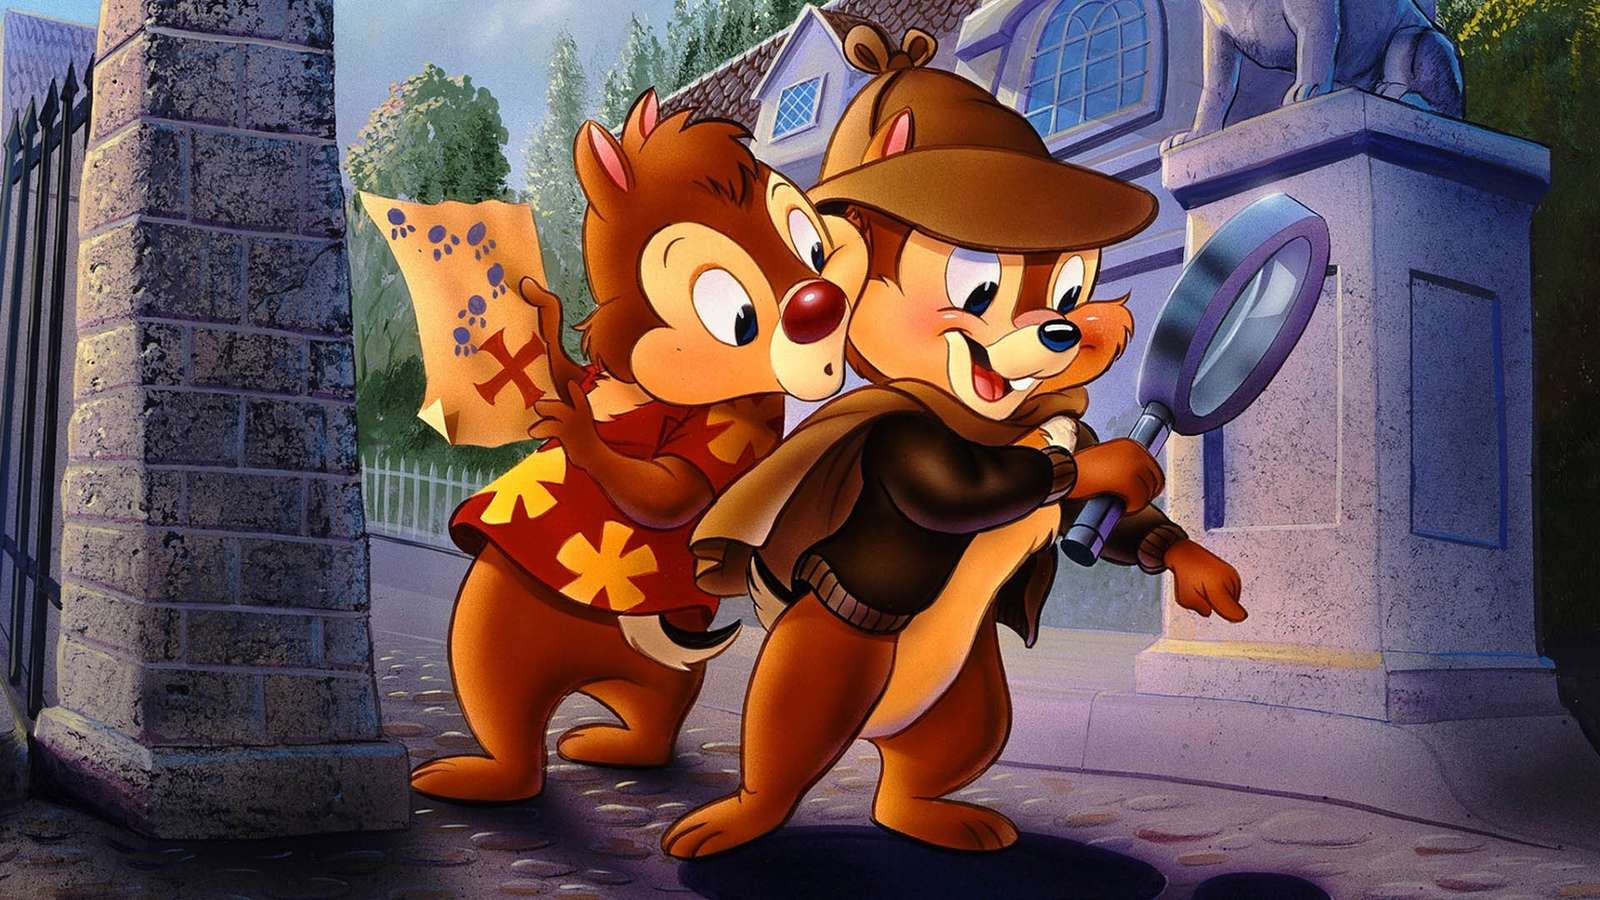 Dale and Chip puzzle online